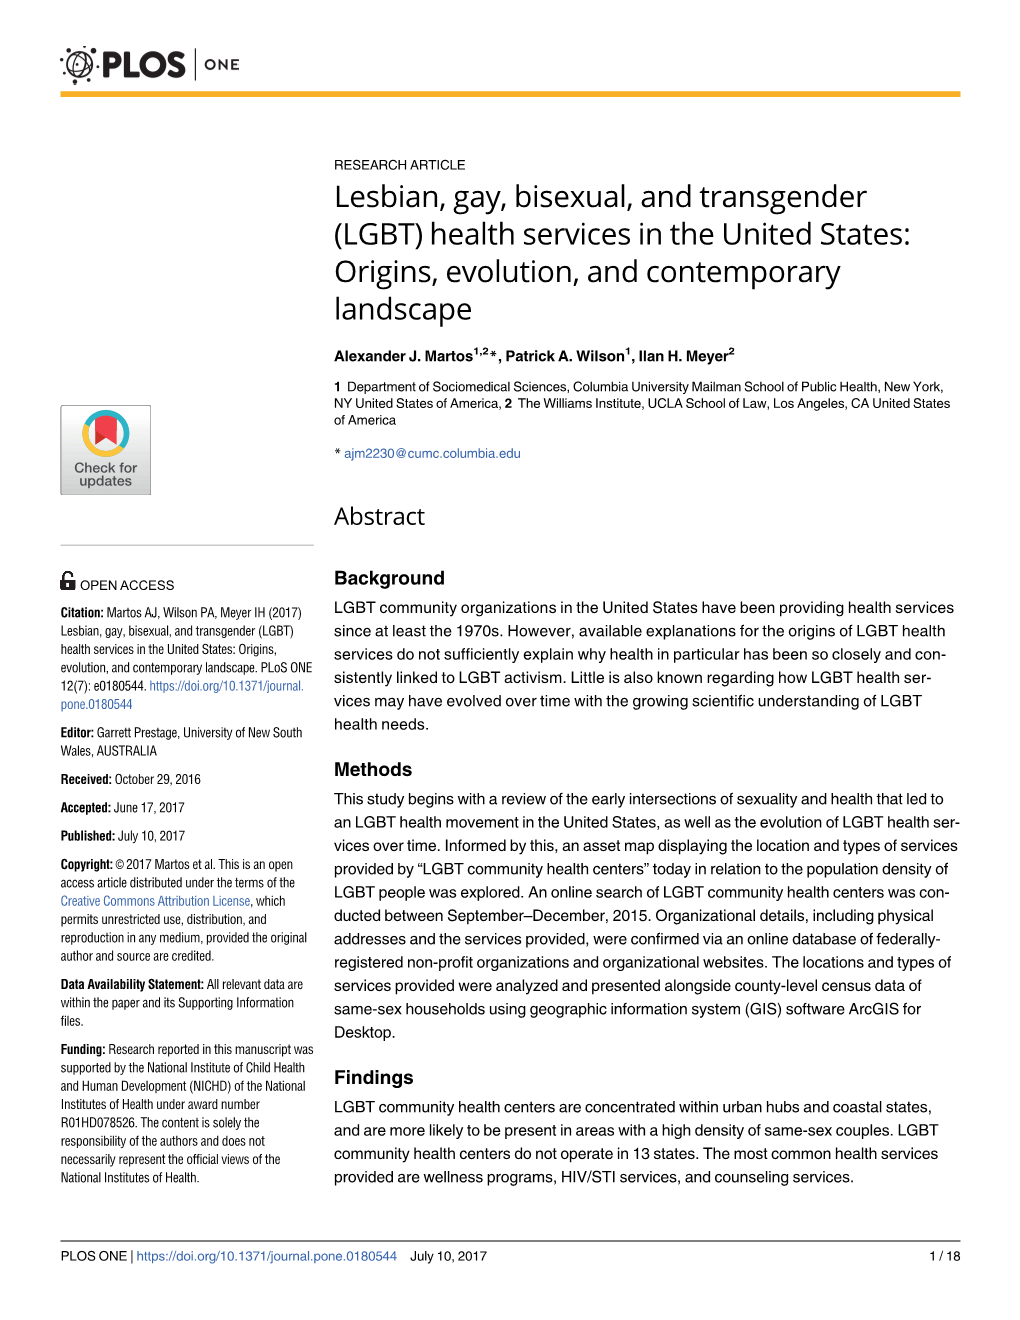 Lesbian, Gay, Bisexual, and Transgender (LGBT) Health Services in the United States: Origins, Evolution, and Contemporary Landscape